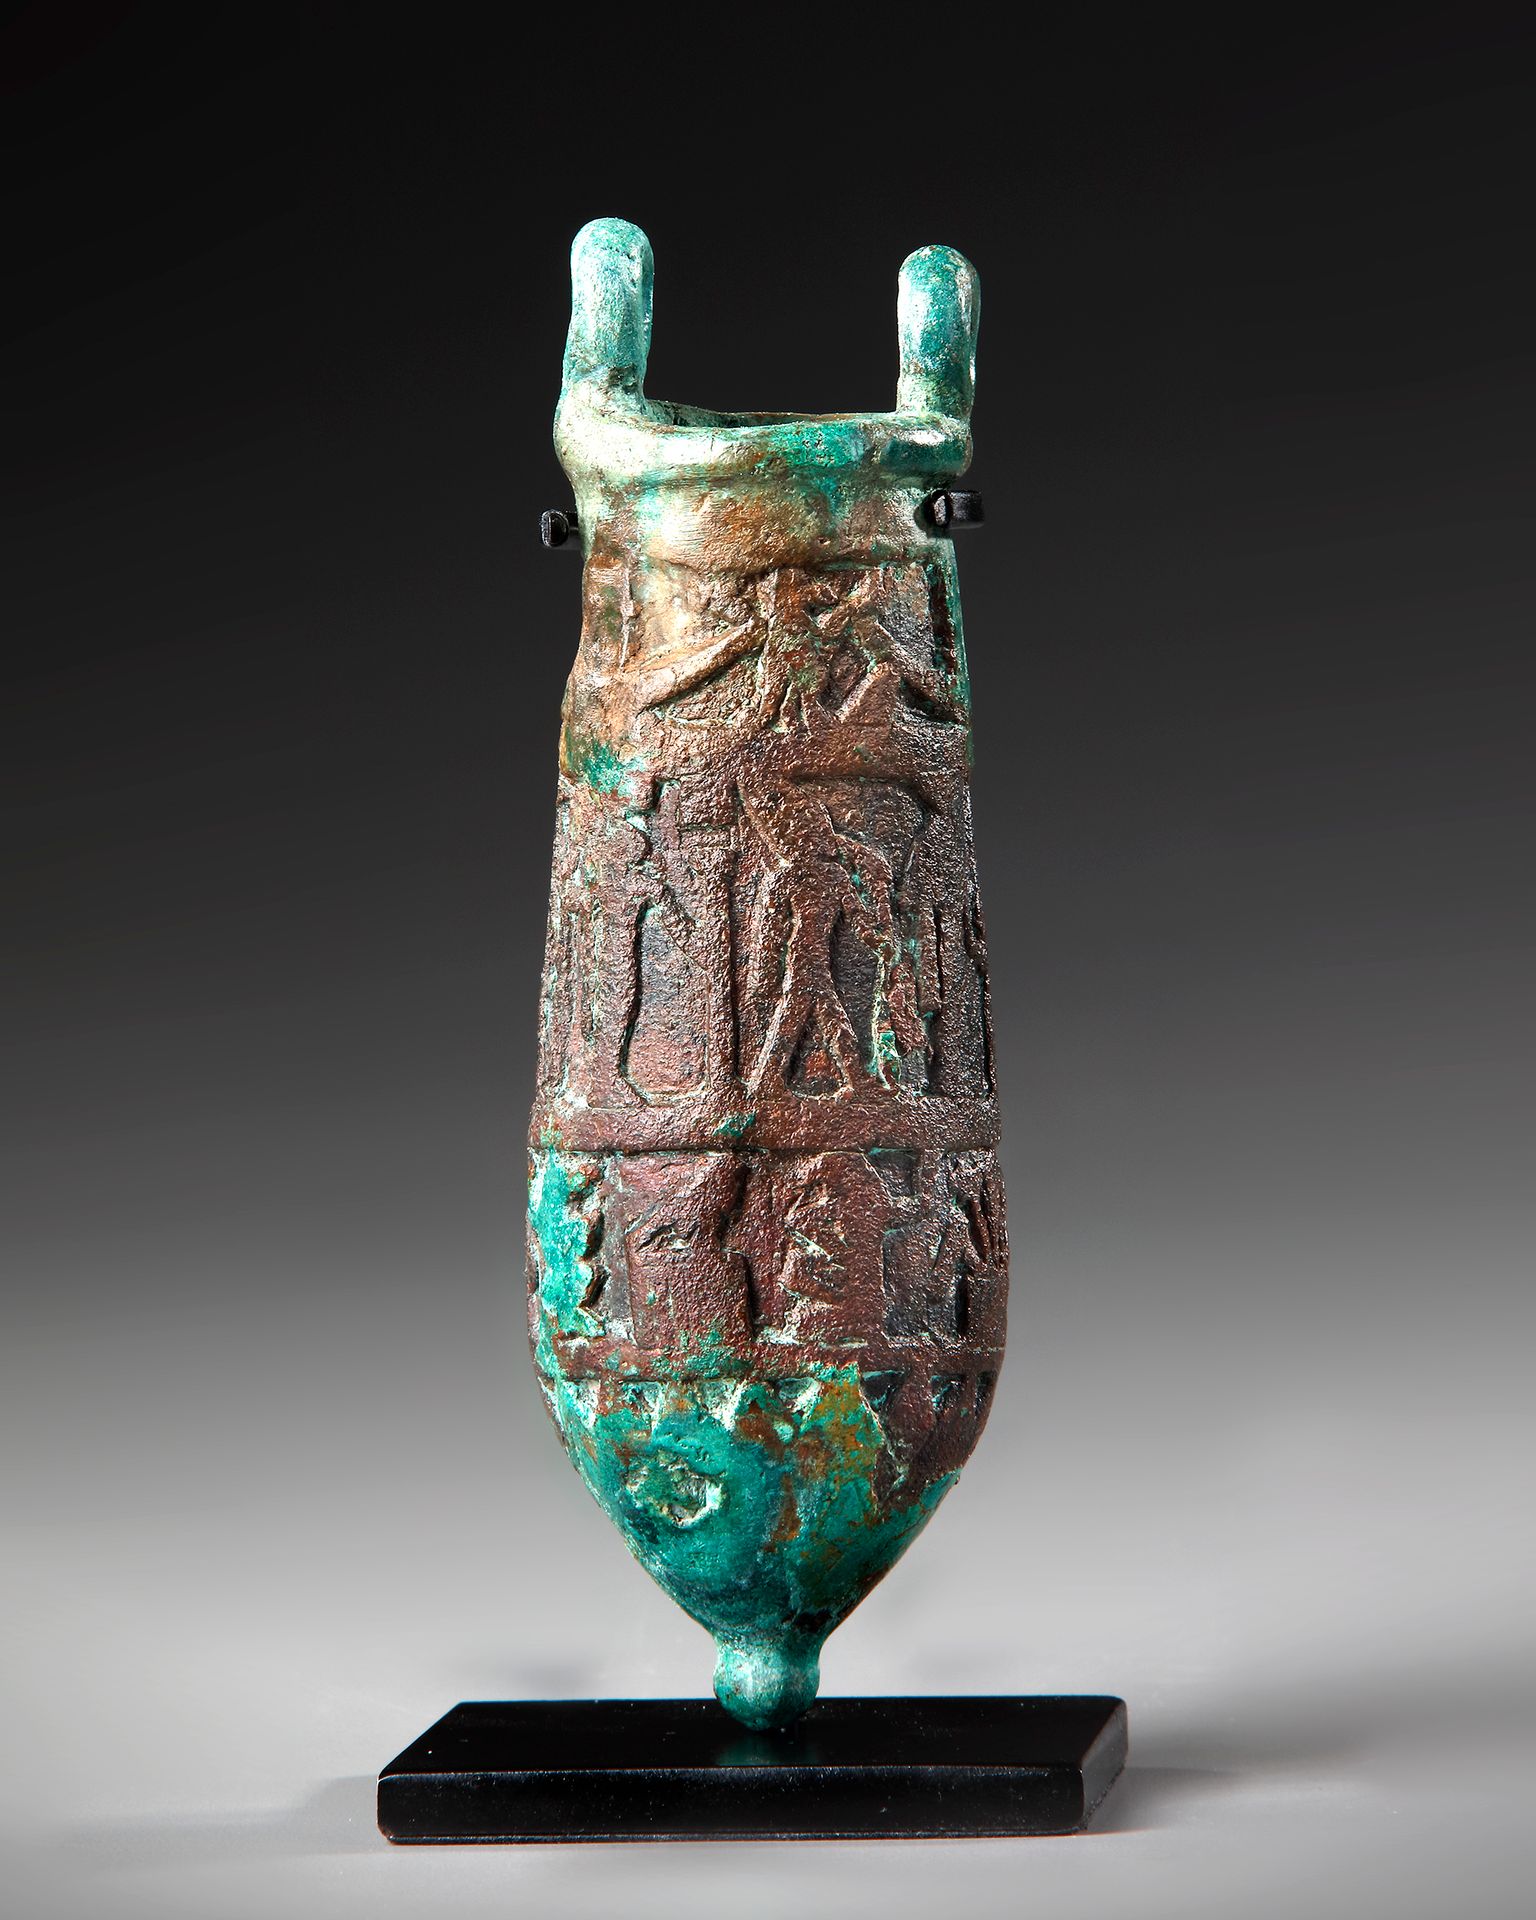 AN EGYPTIAN BRONZE SITULA, PTOLEMAIC PERIOD, CIRCA 304-30 B.C. With two distinct&hellip;